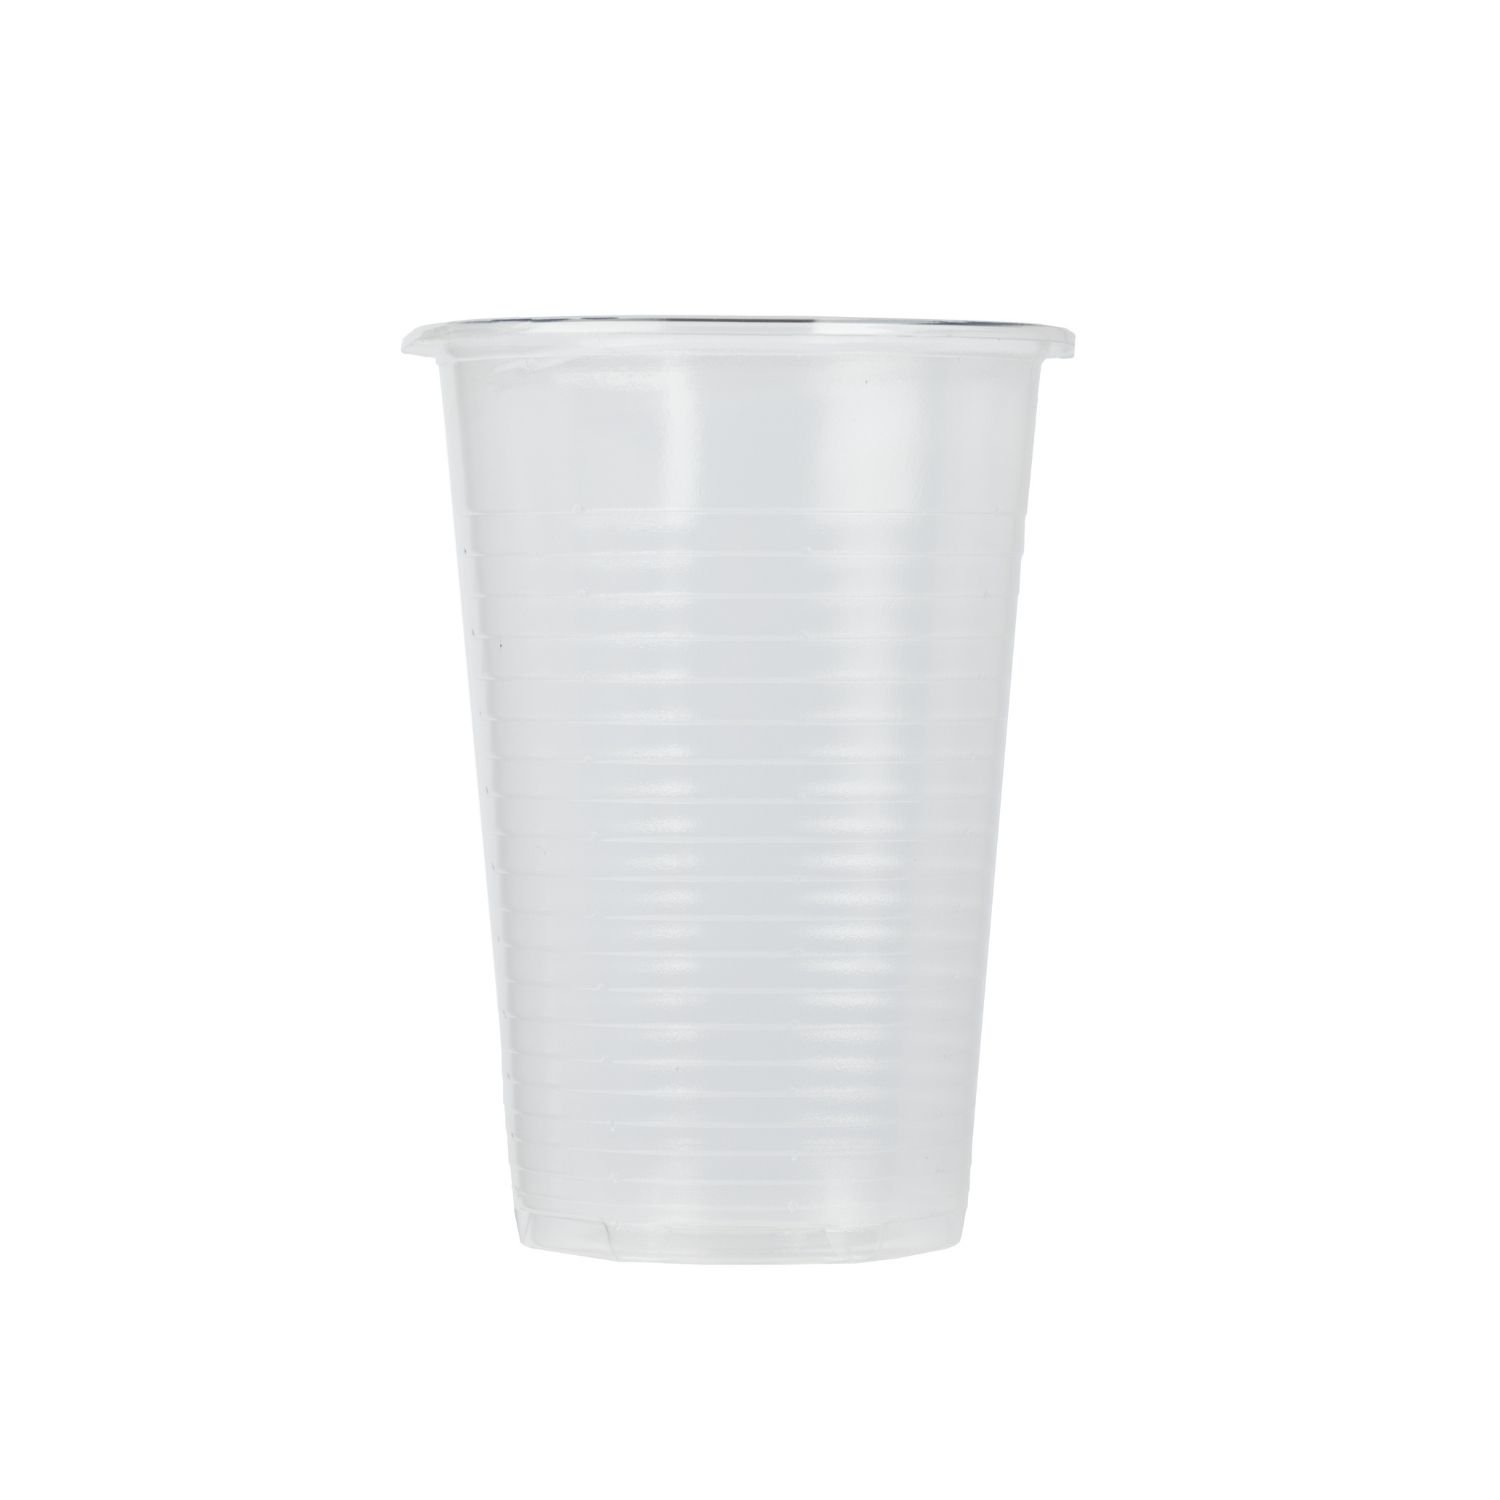 2000 x Clear Disposable Plastic 7oz Cups Cold Drink Tumbler Water Cooler Cups 